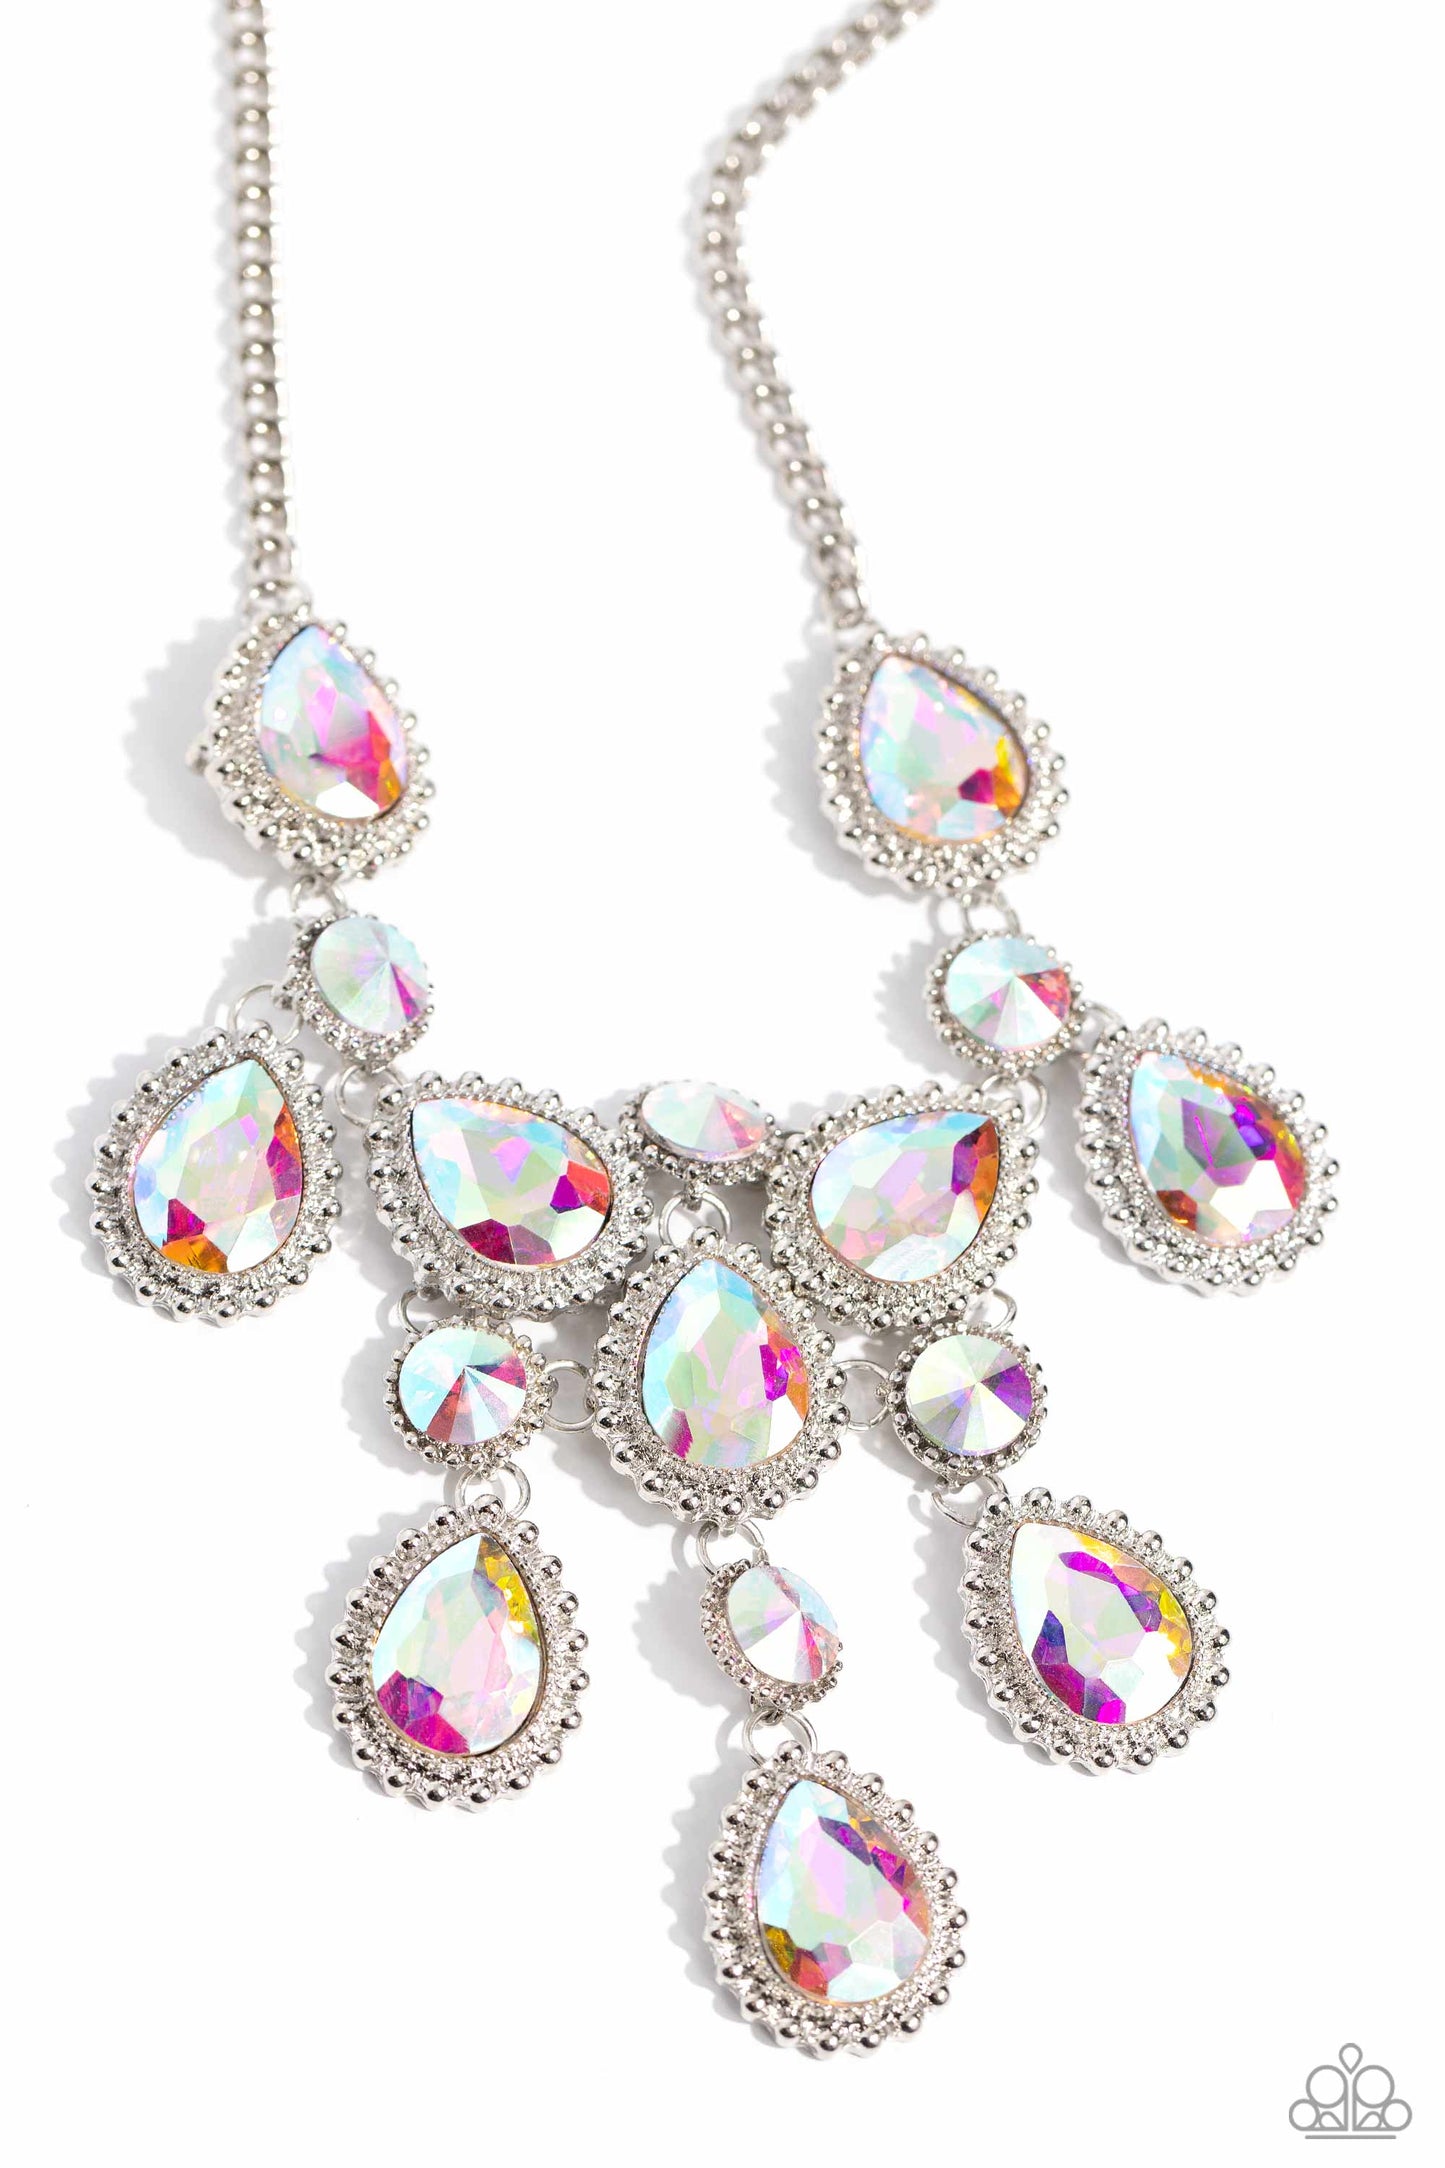 Dripping in Dazzle - Multi Iridescent Necklace - Paparazzi Accessories - An explosion of round, teardrop, and marquise-cut gems in varying sizes bordered by tactile silver studs cluster together to create a glittery iridescent showcase down the neckline. Featuring various shades of iridescence, each gem reflects light off of its faceted surface emitting further glitz and glam.